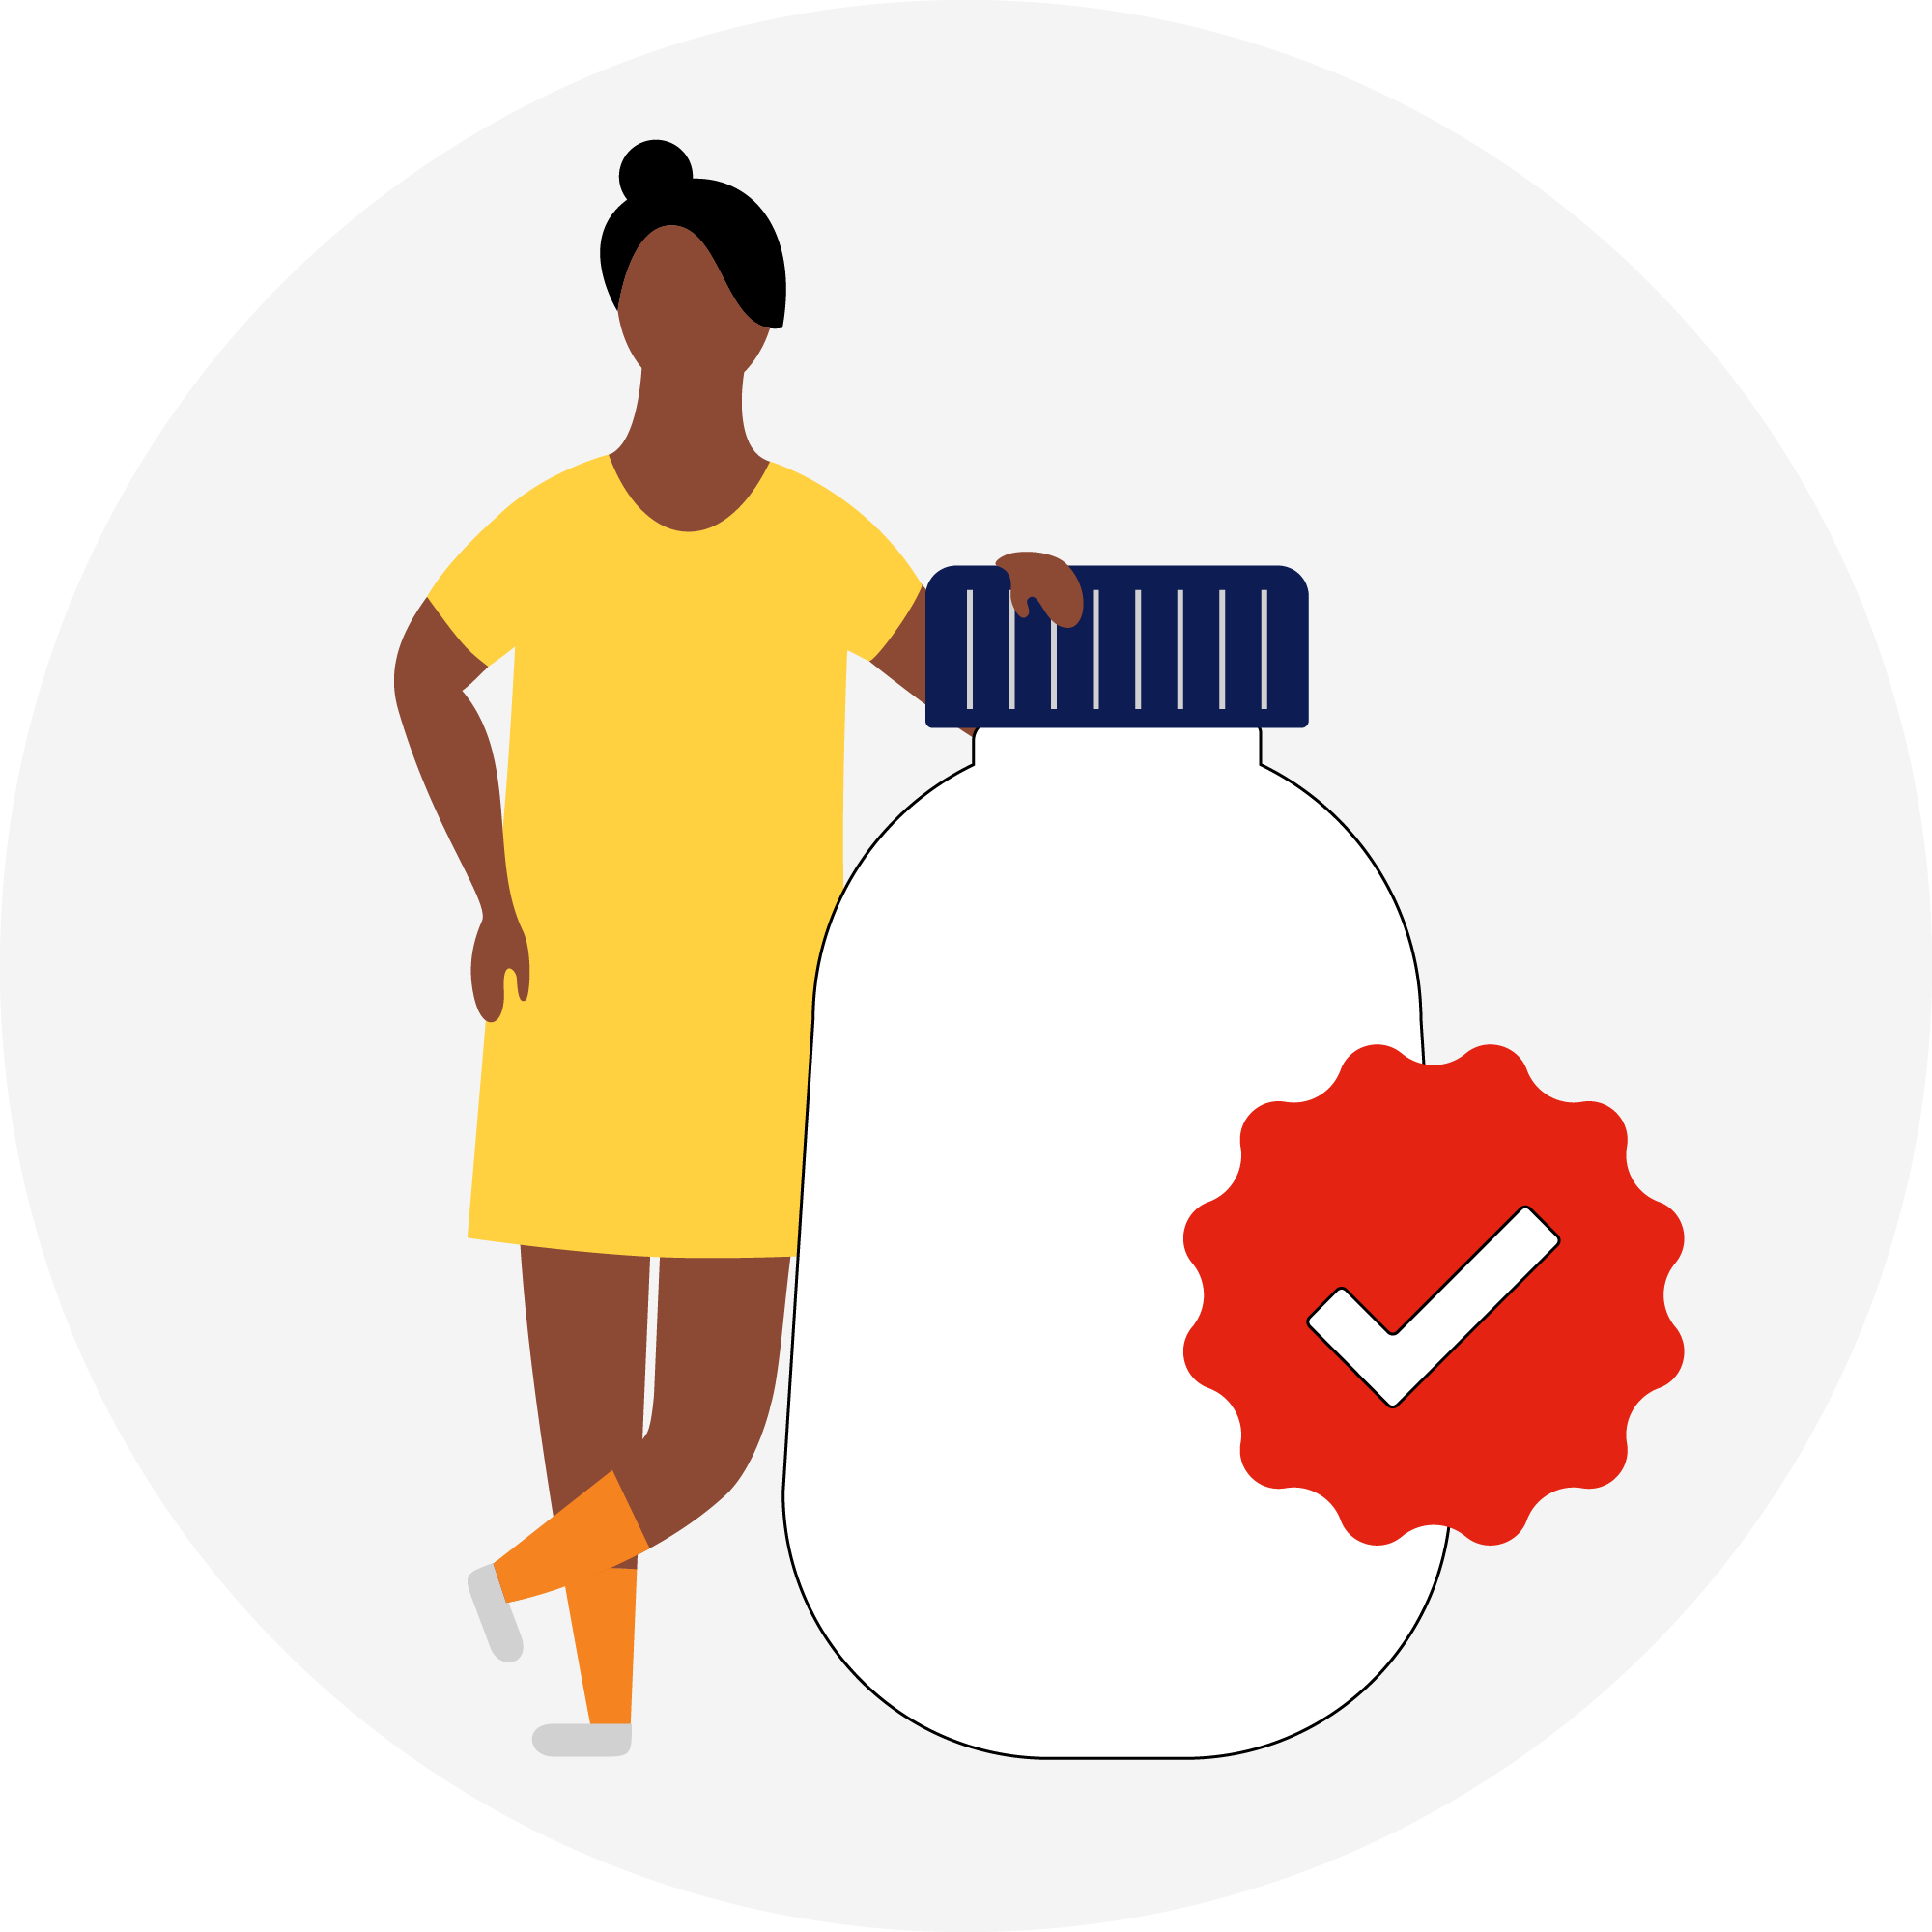 illustration of a person leaning on a milk donation container with a red tick symbol on it